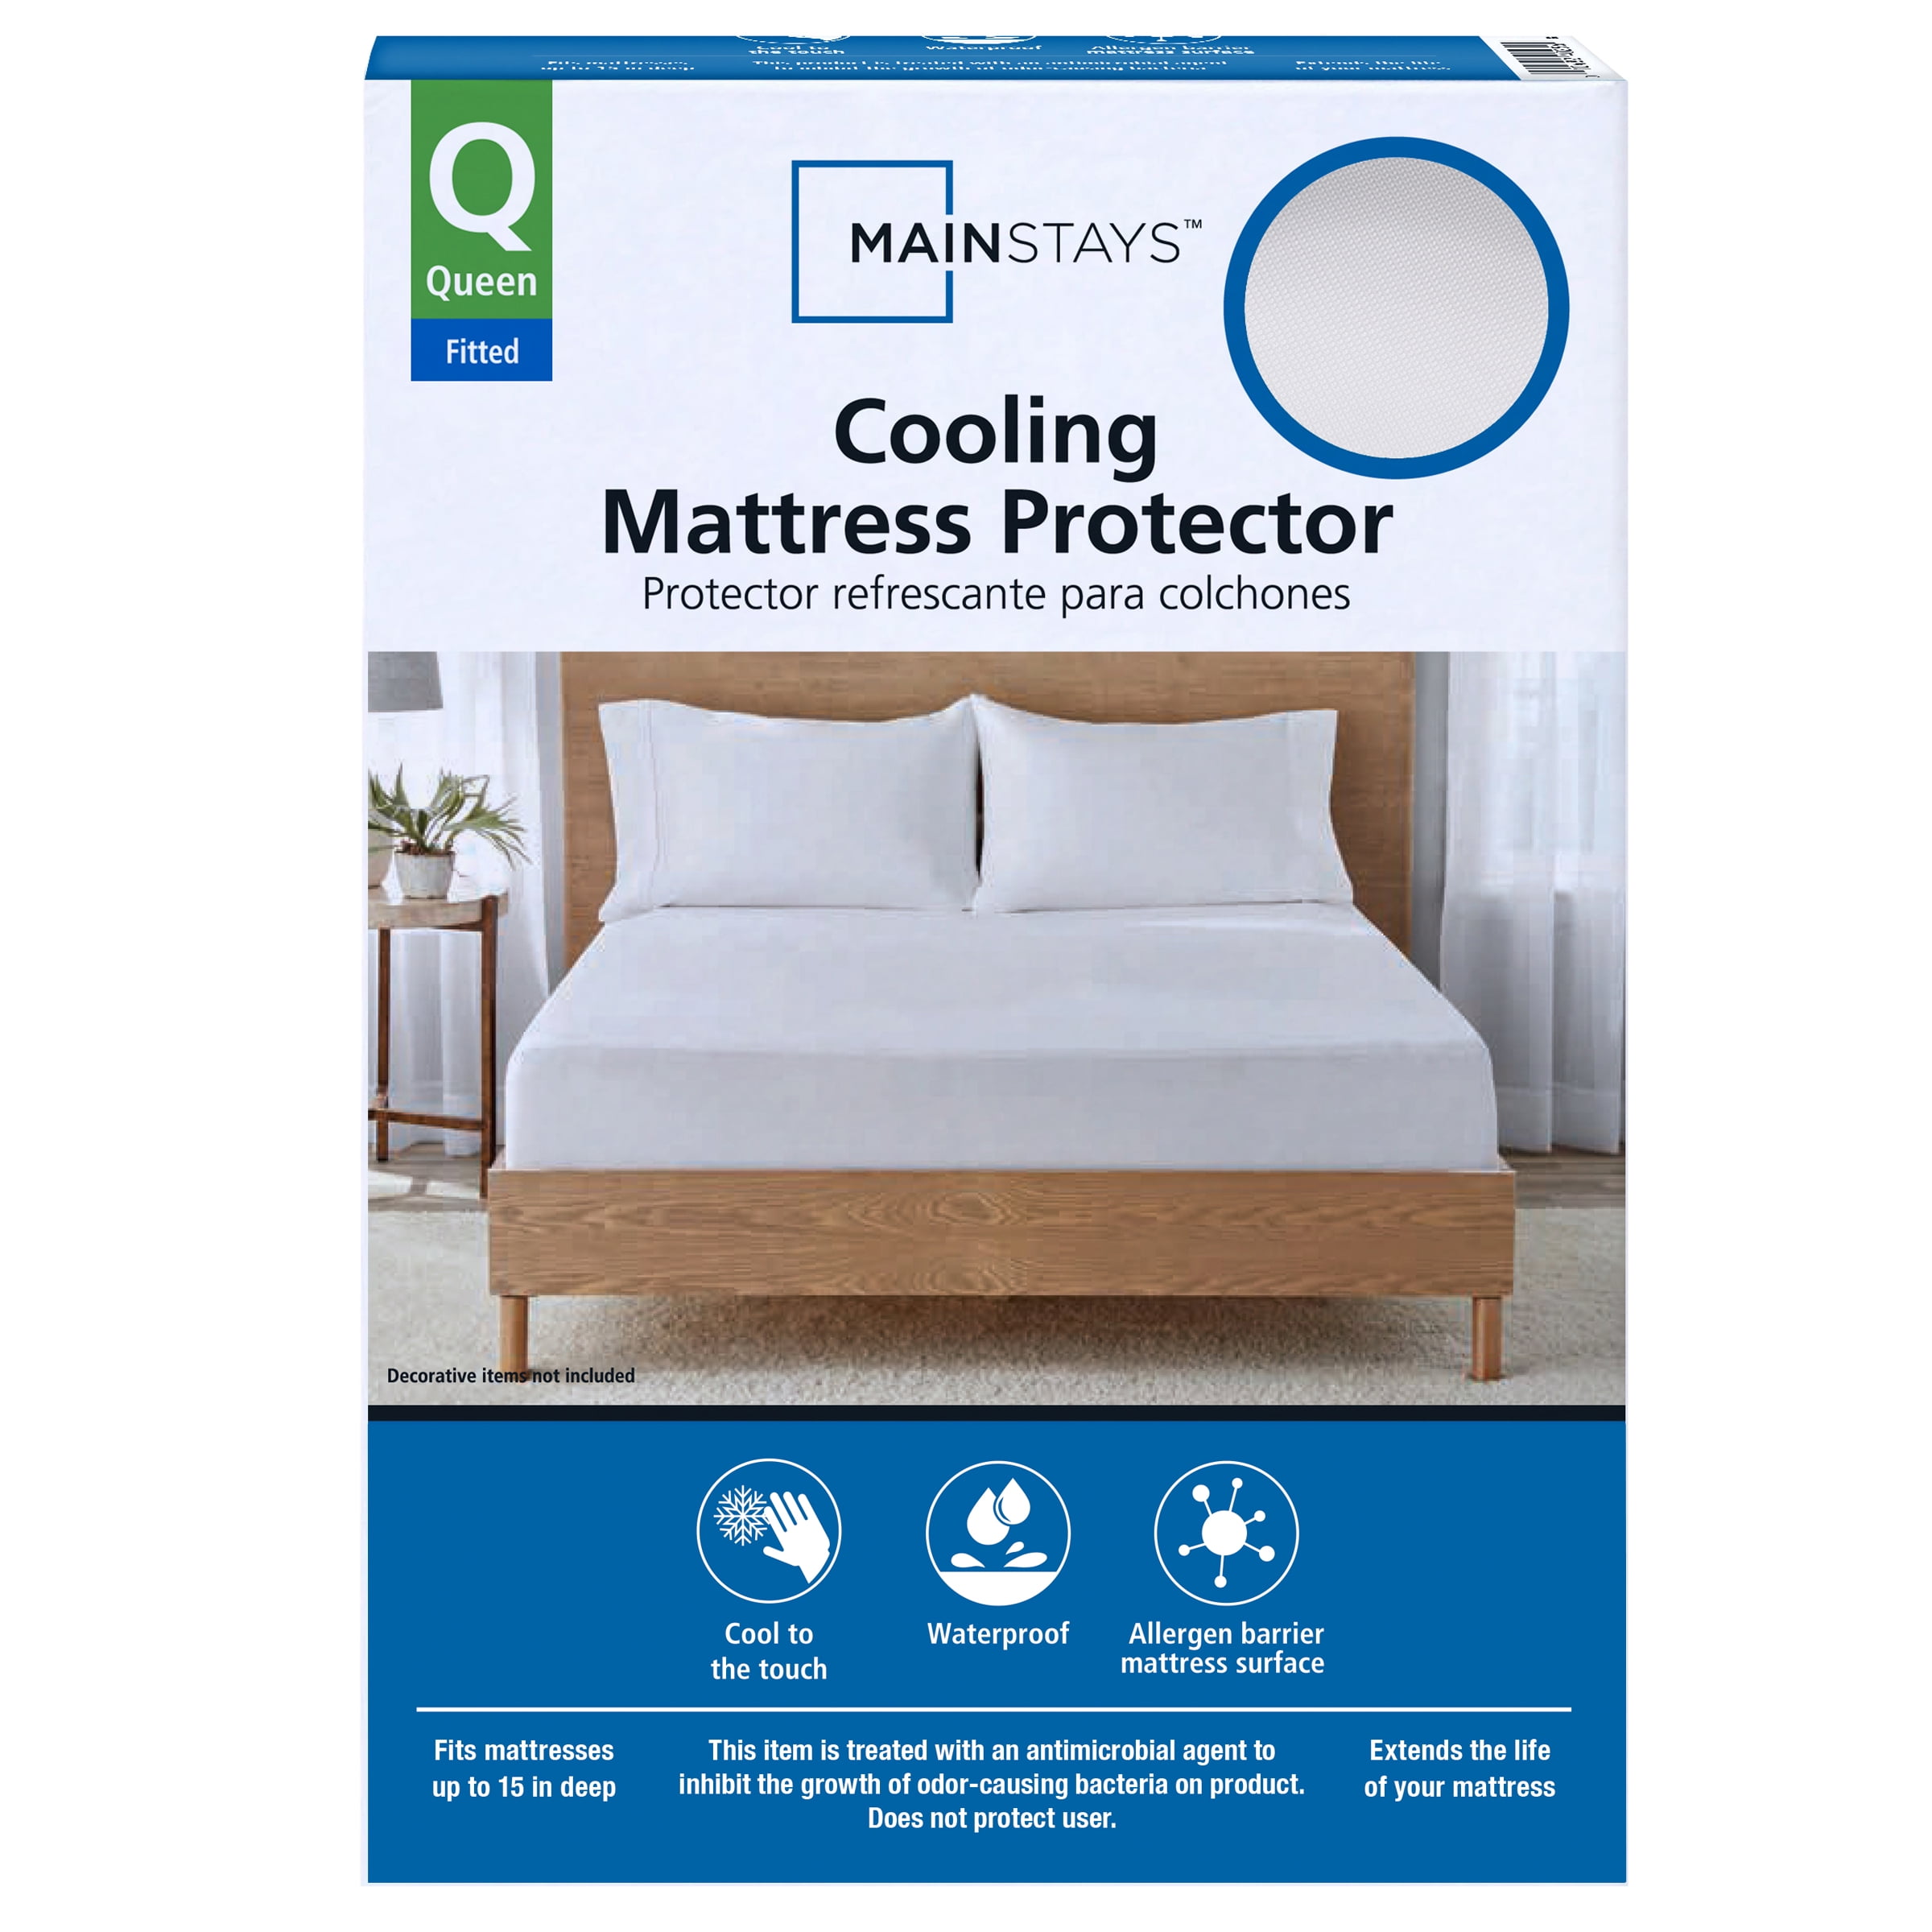 Mainstays Soft Terry Waterproof Fitted Mattress Protector, Queen